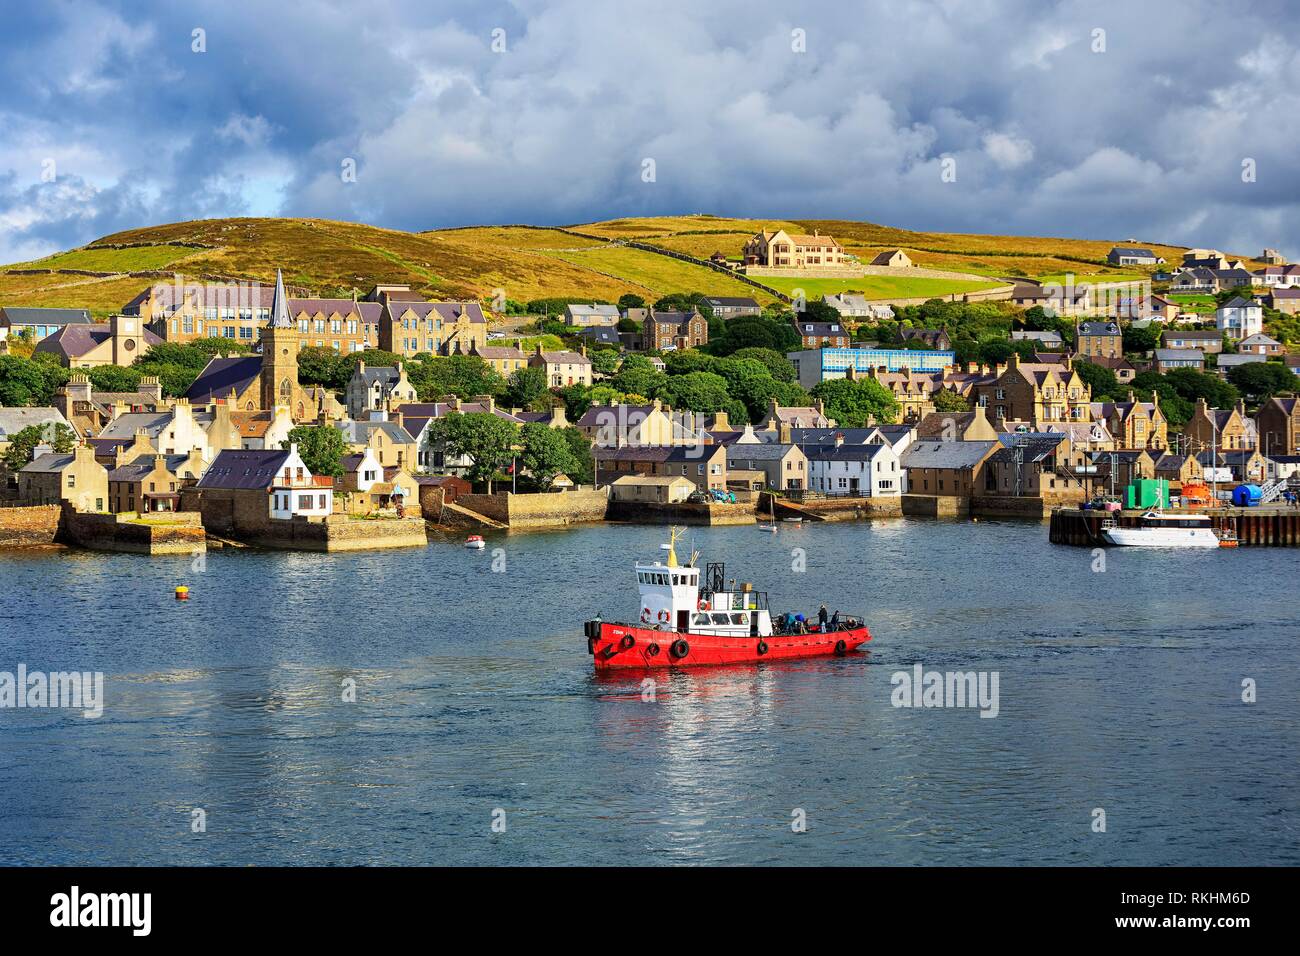 Boat off the seaport of Stromness, Mainland, Orkney Islands, Scotland, Great Britain Stock Photo